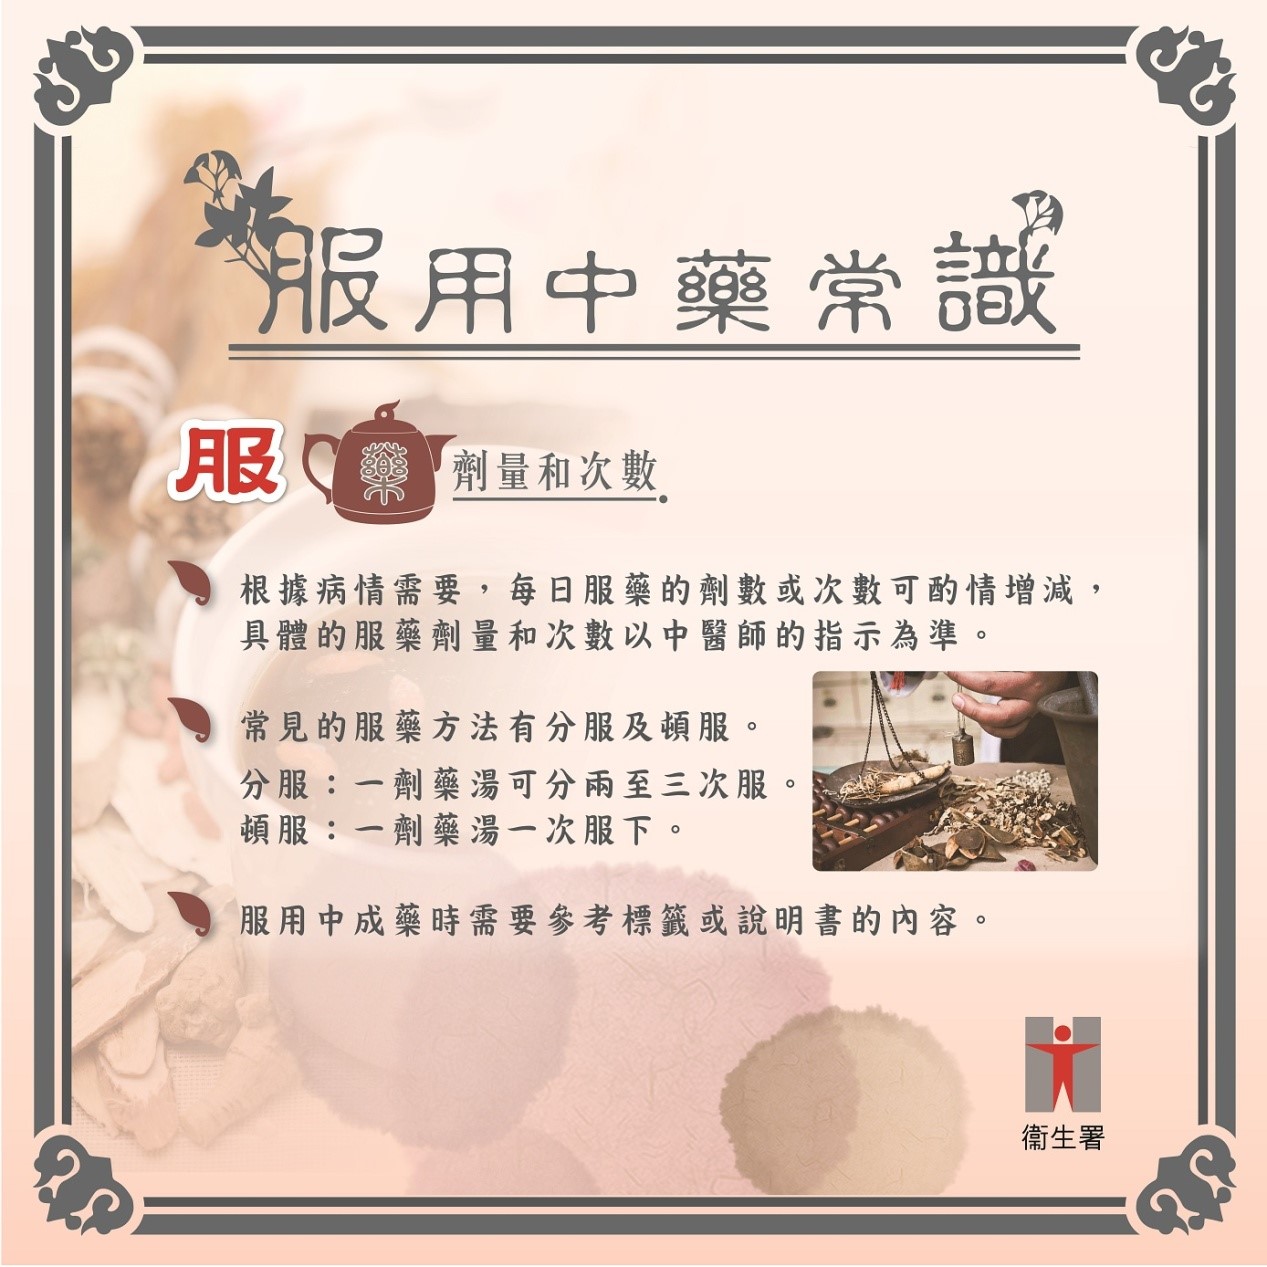 General Knowledge of Taking Chinese Medicines (Chinese version only)